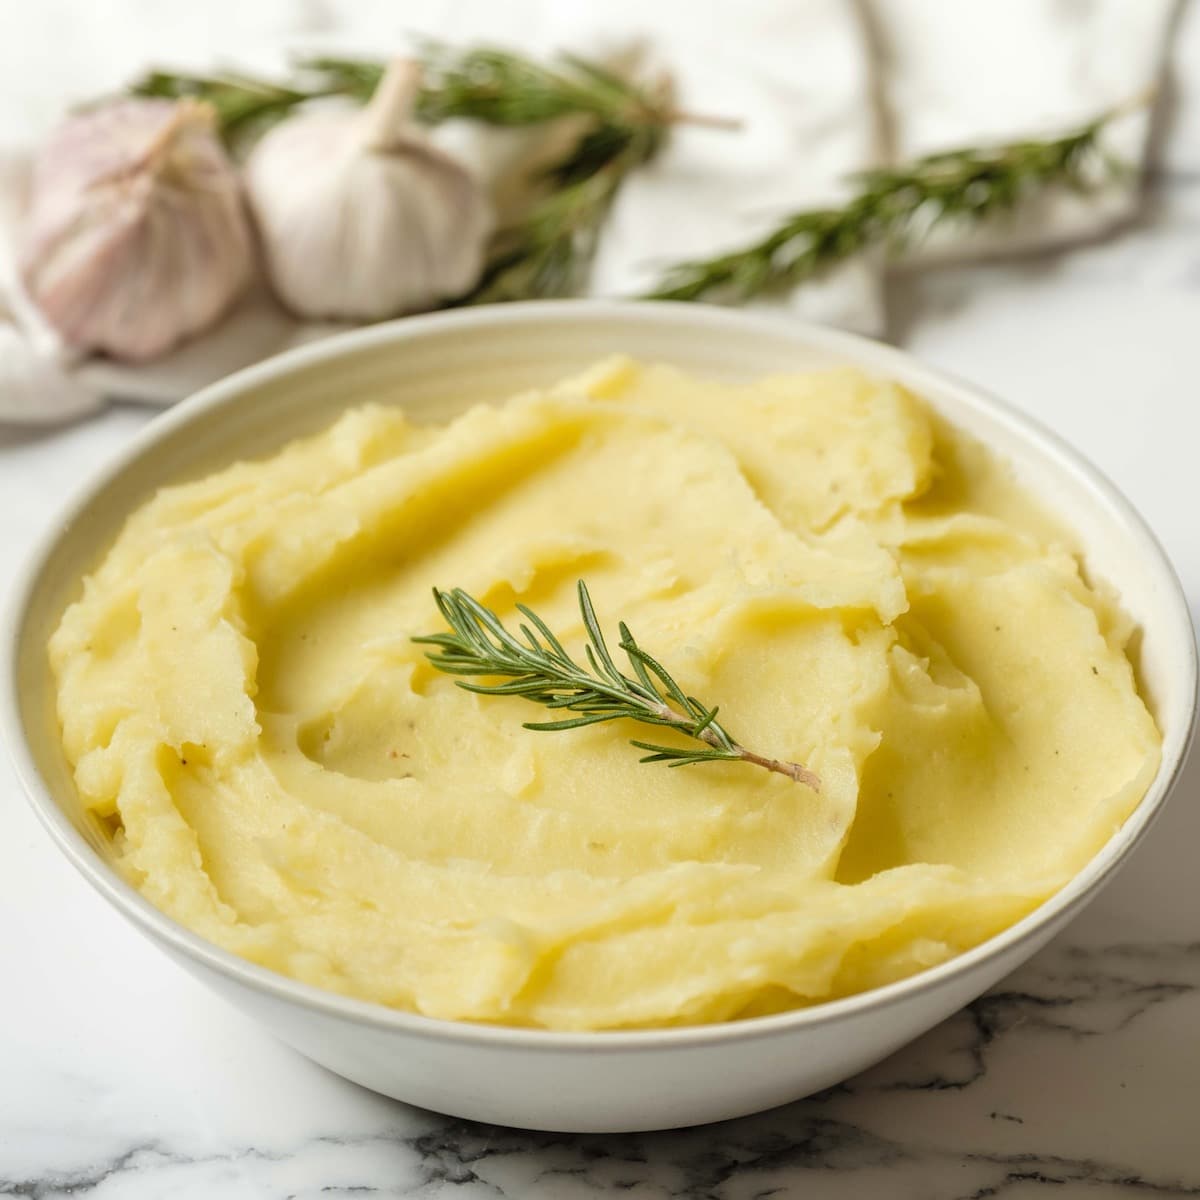 Square featured shot - Dish of olive oil mashed potatoes garnished with fresh rosemary on a marble countertop, garlic heads and rosemary in background with linen towel.